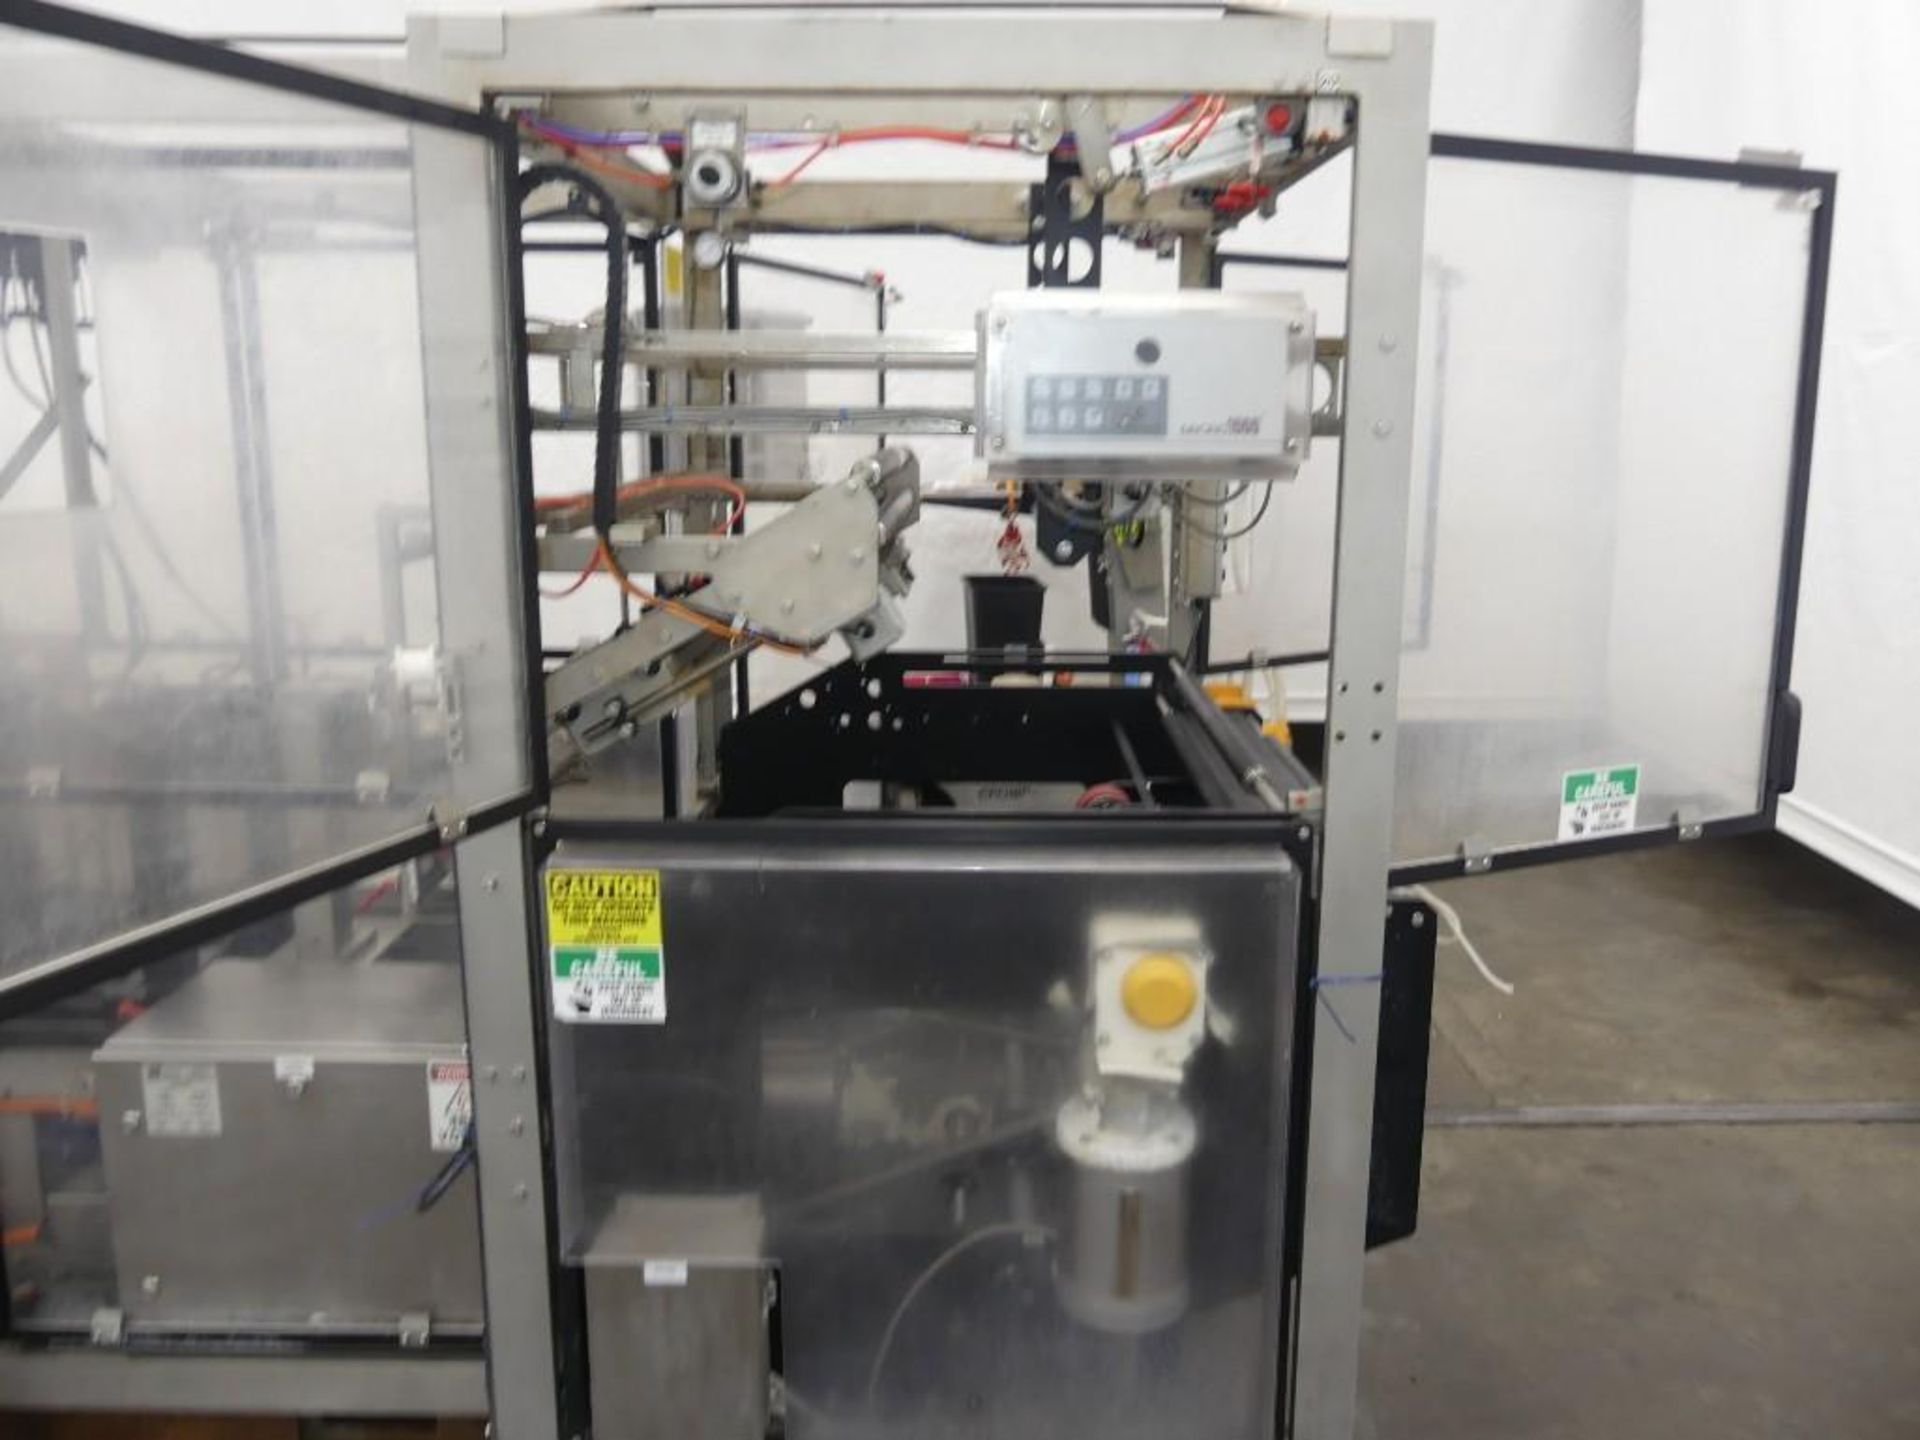 Massman HFFS-IM1000 Flexible Pouch Packaging System - Image 13 of 127